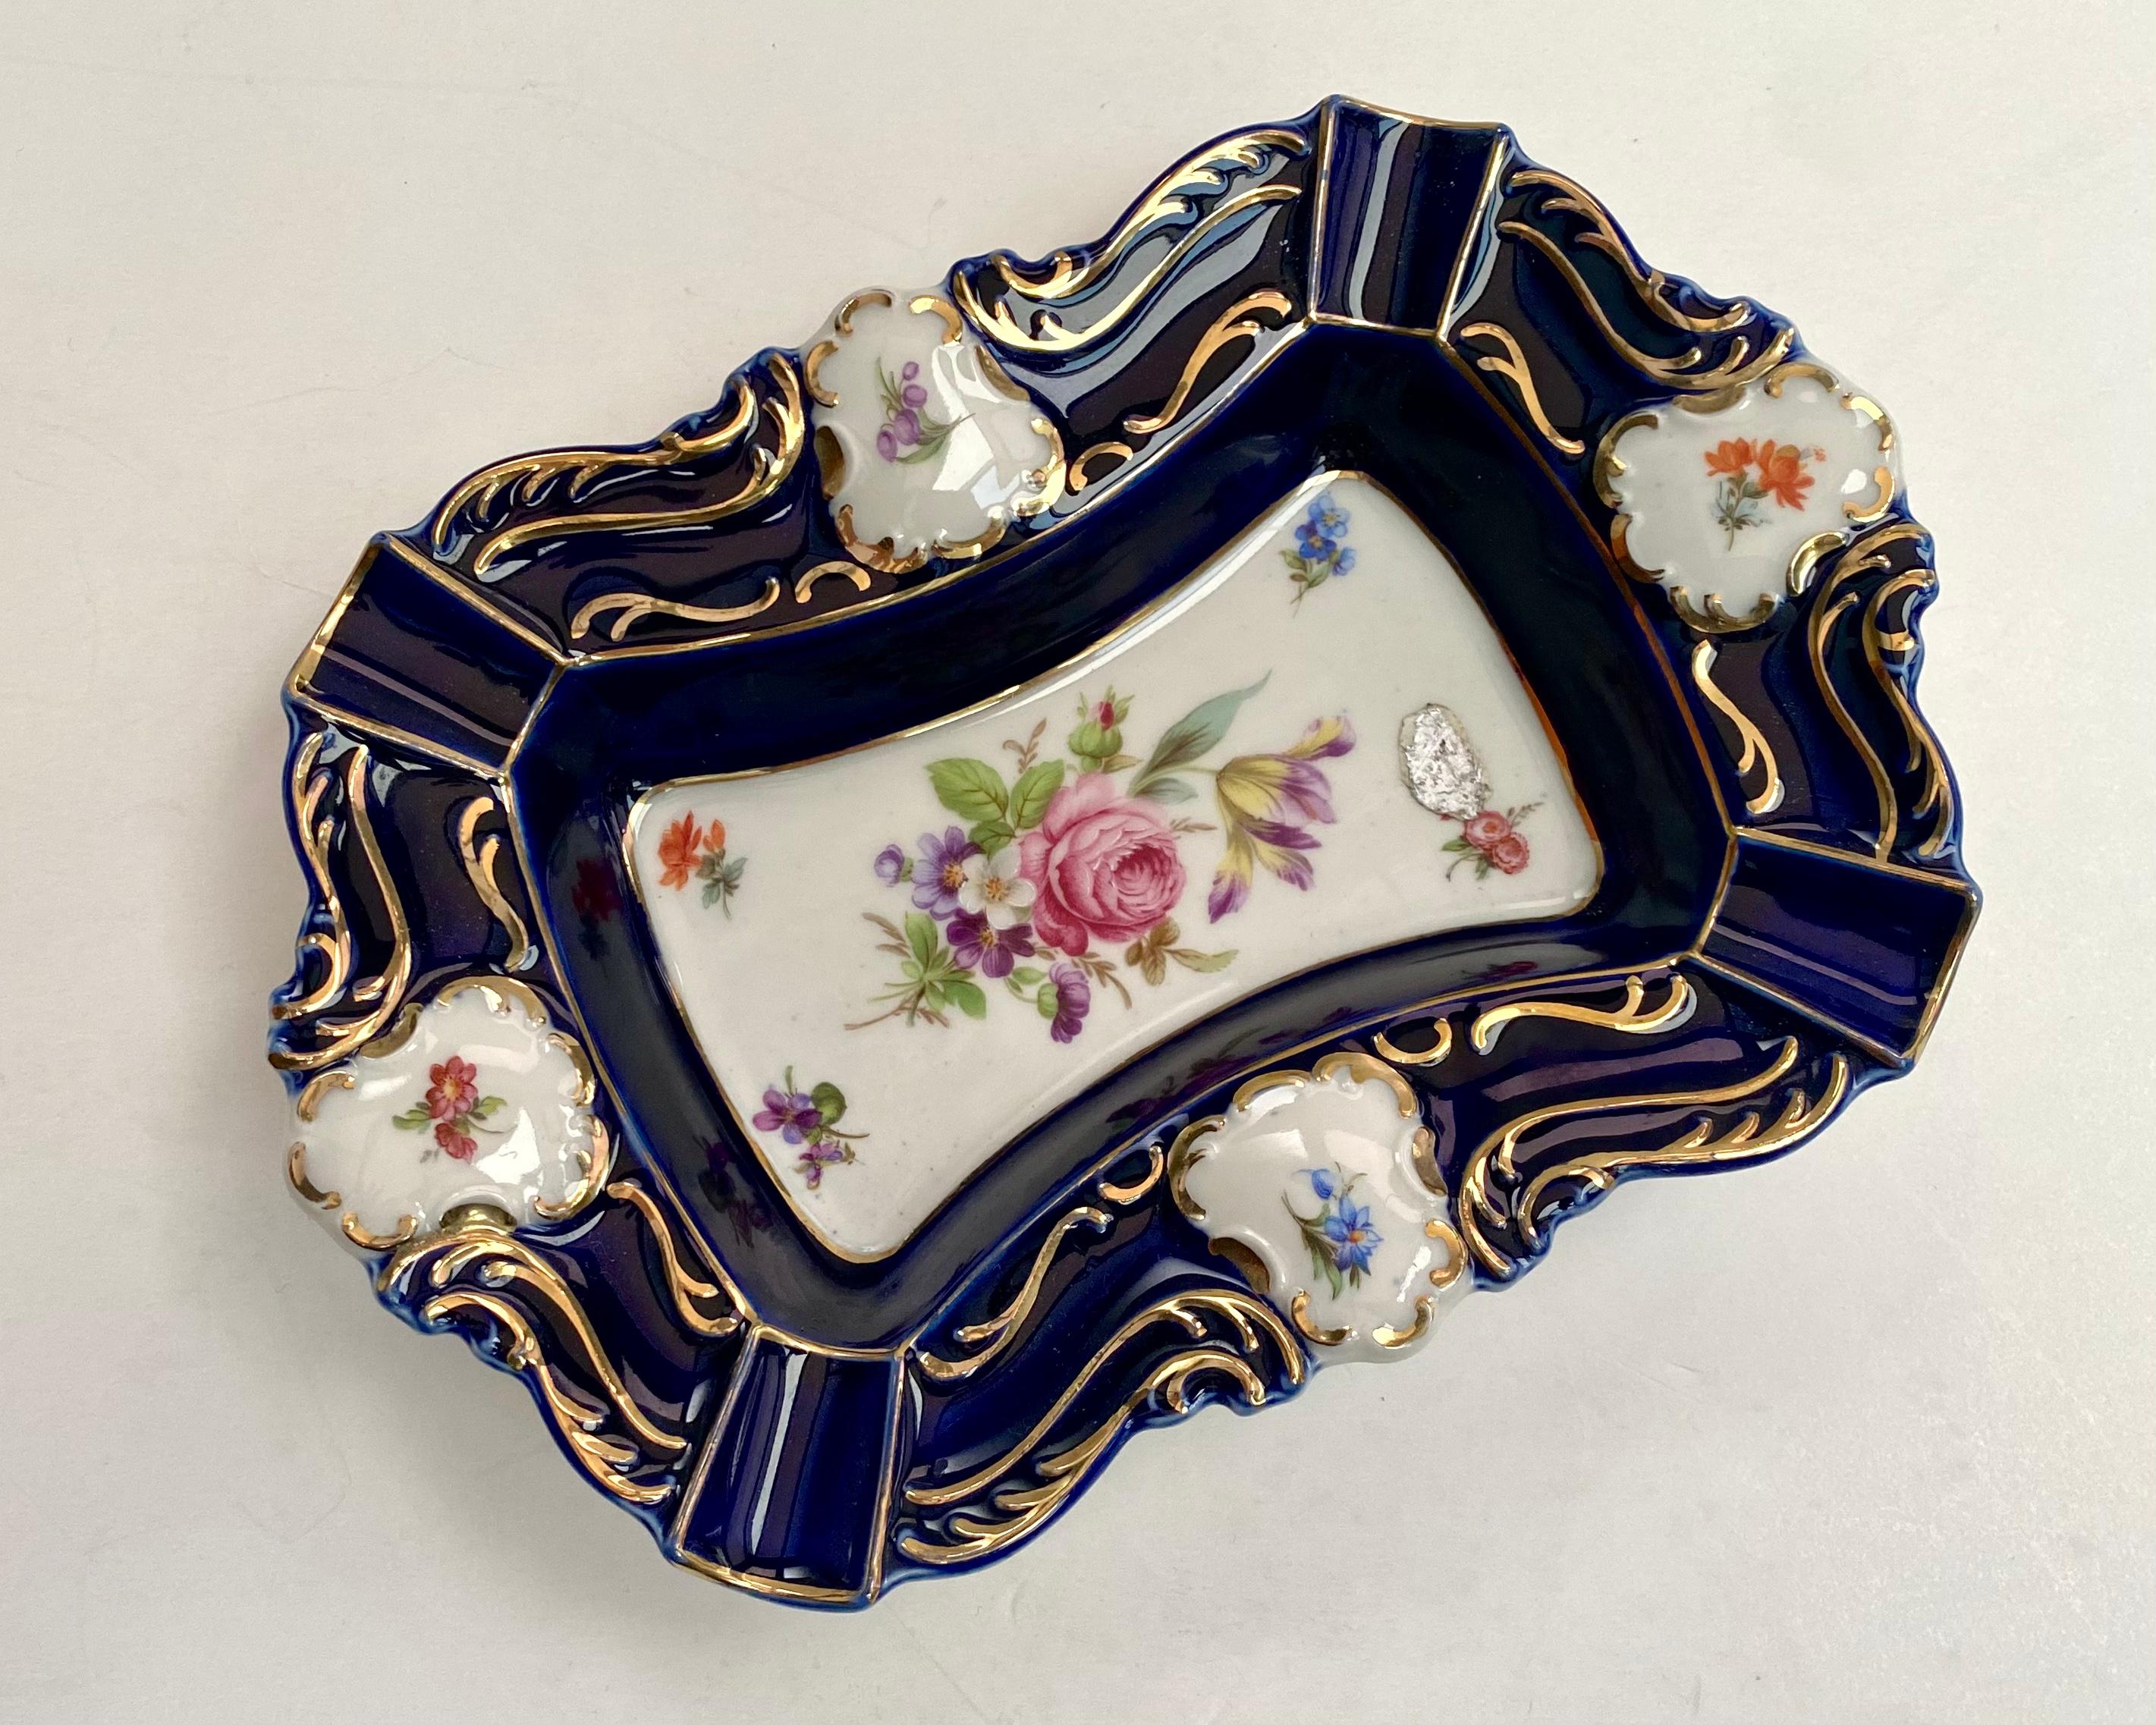 Vintage rectangular ashtray/empty pocket by Lindner, France. 1970s.

Luxurious ashtray made of wonderful porcelain with Bouquet decor, cobalt, gilding with 24 carat gold.

Decorated with hand-painted Meissen roses decal.

The smoothness of the lines